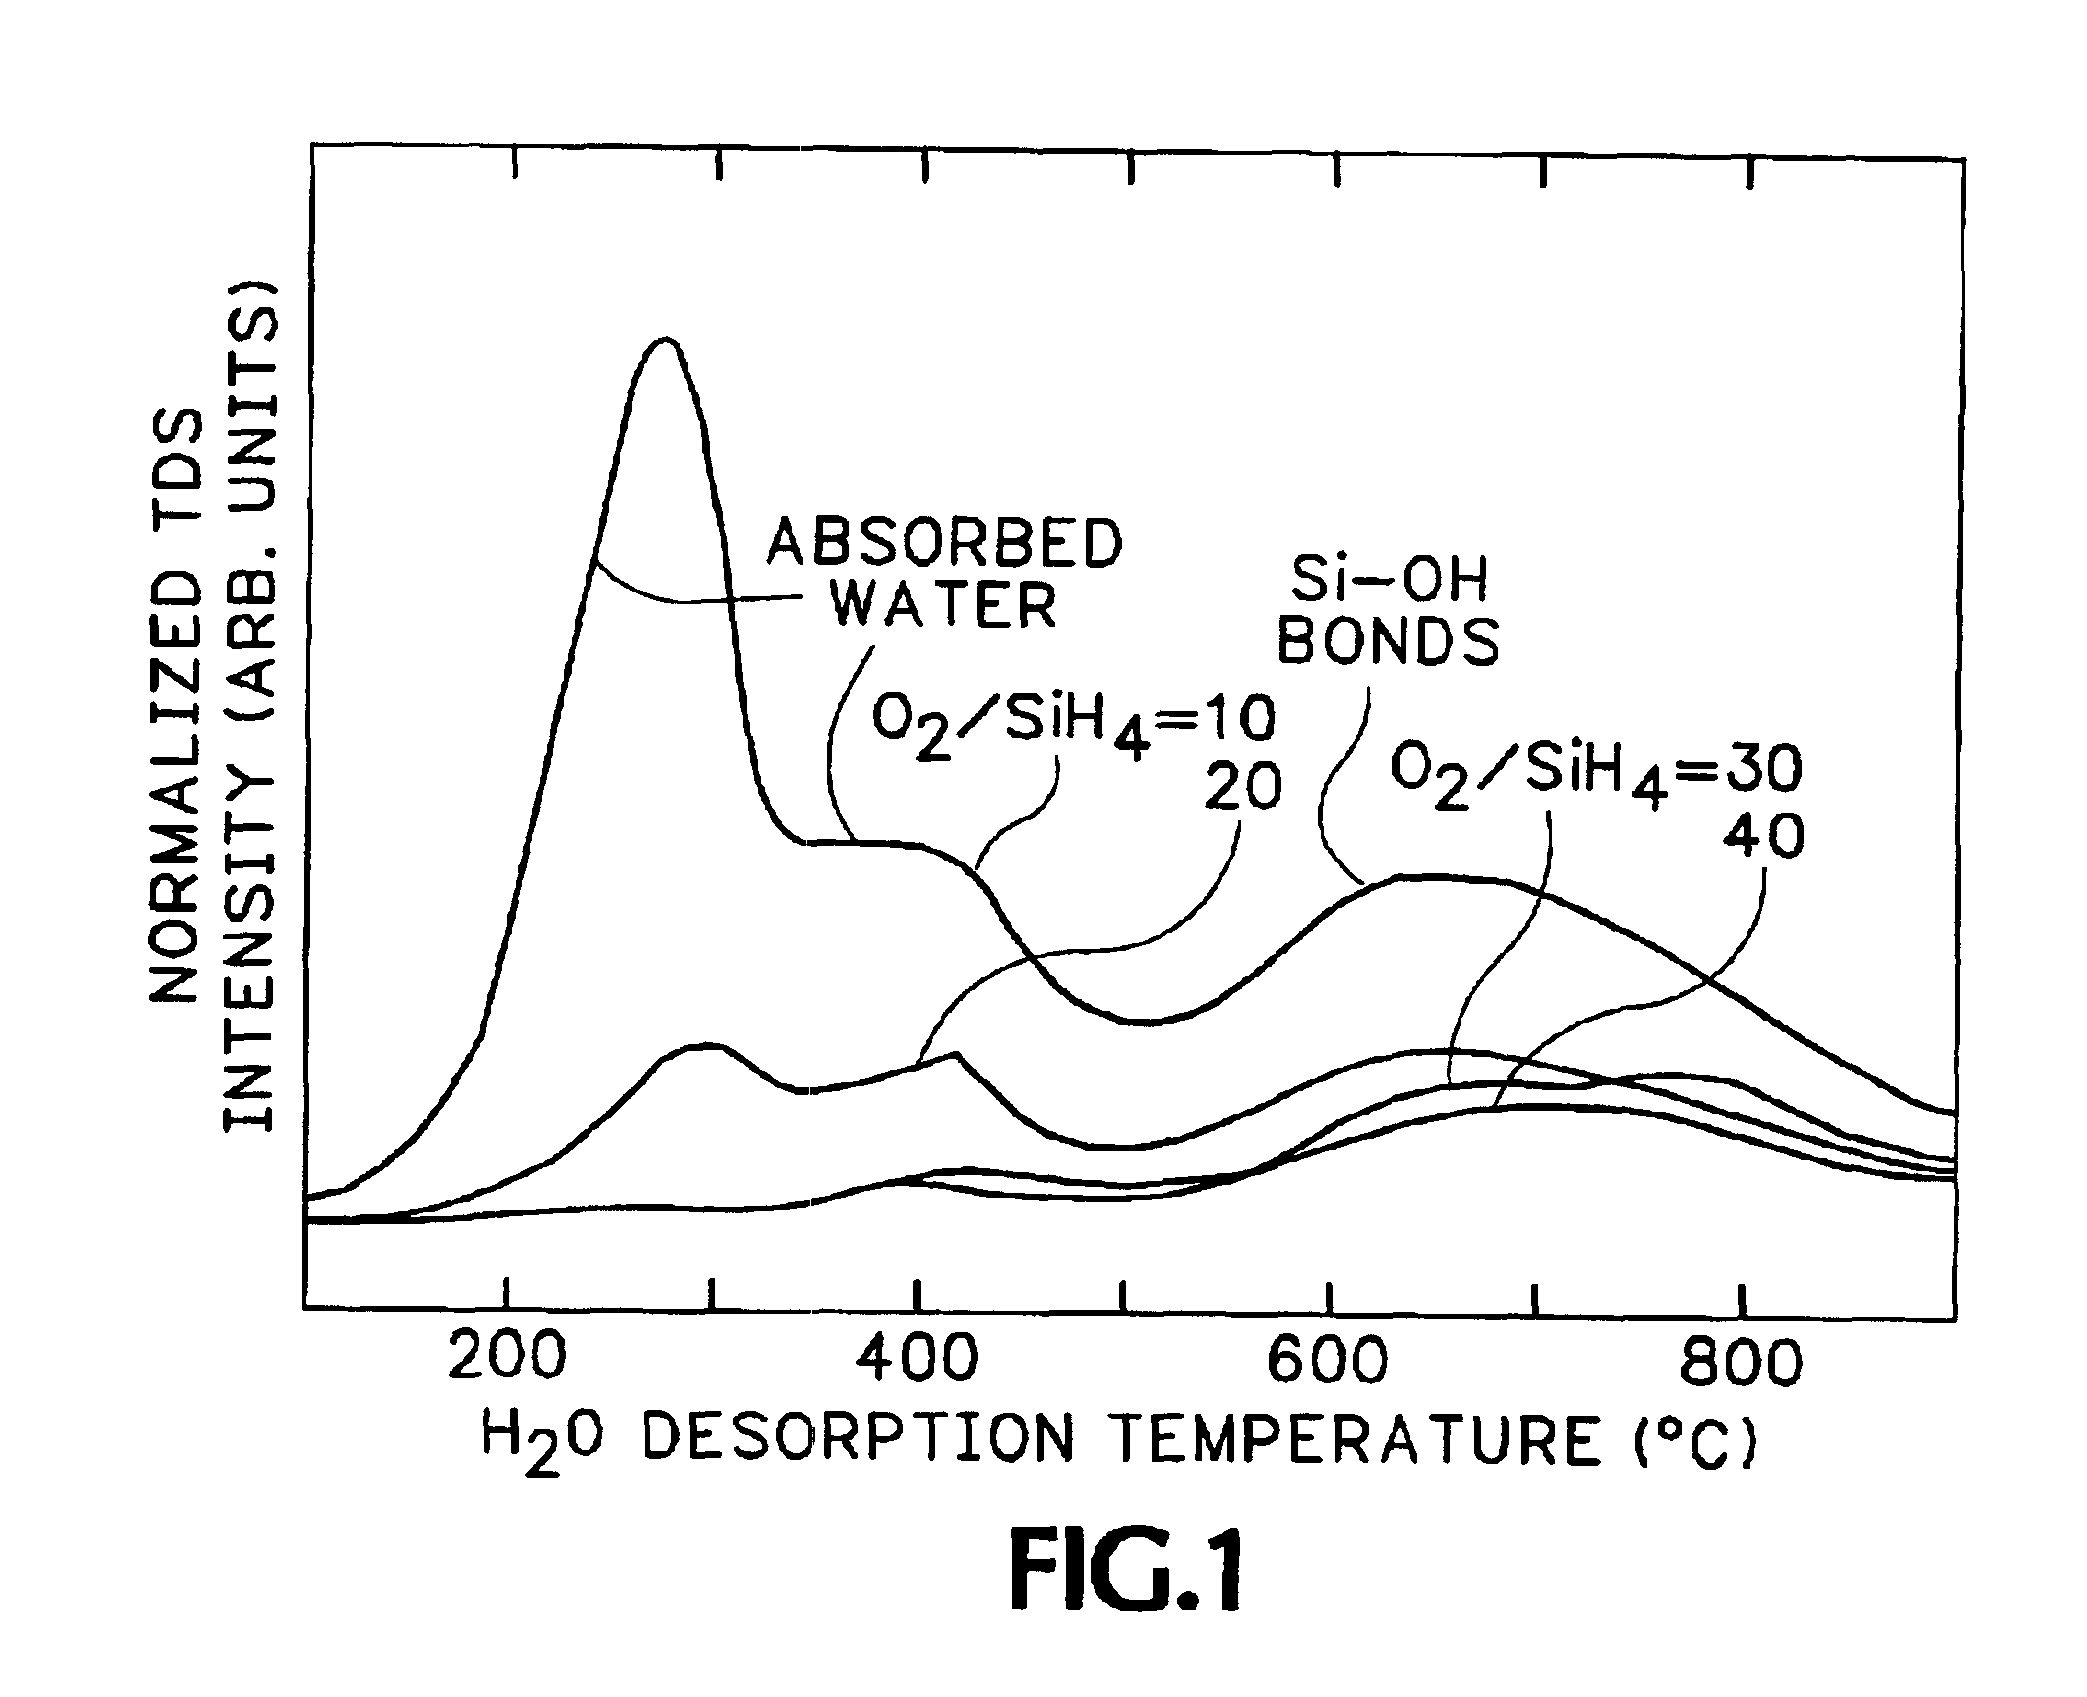 Method of forming multi-layers for a thin film transistor